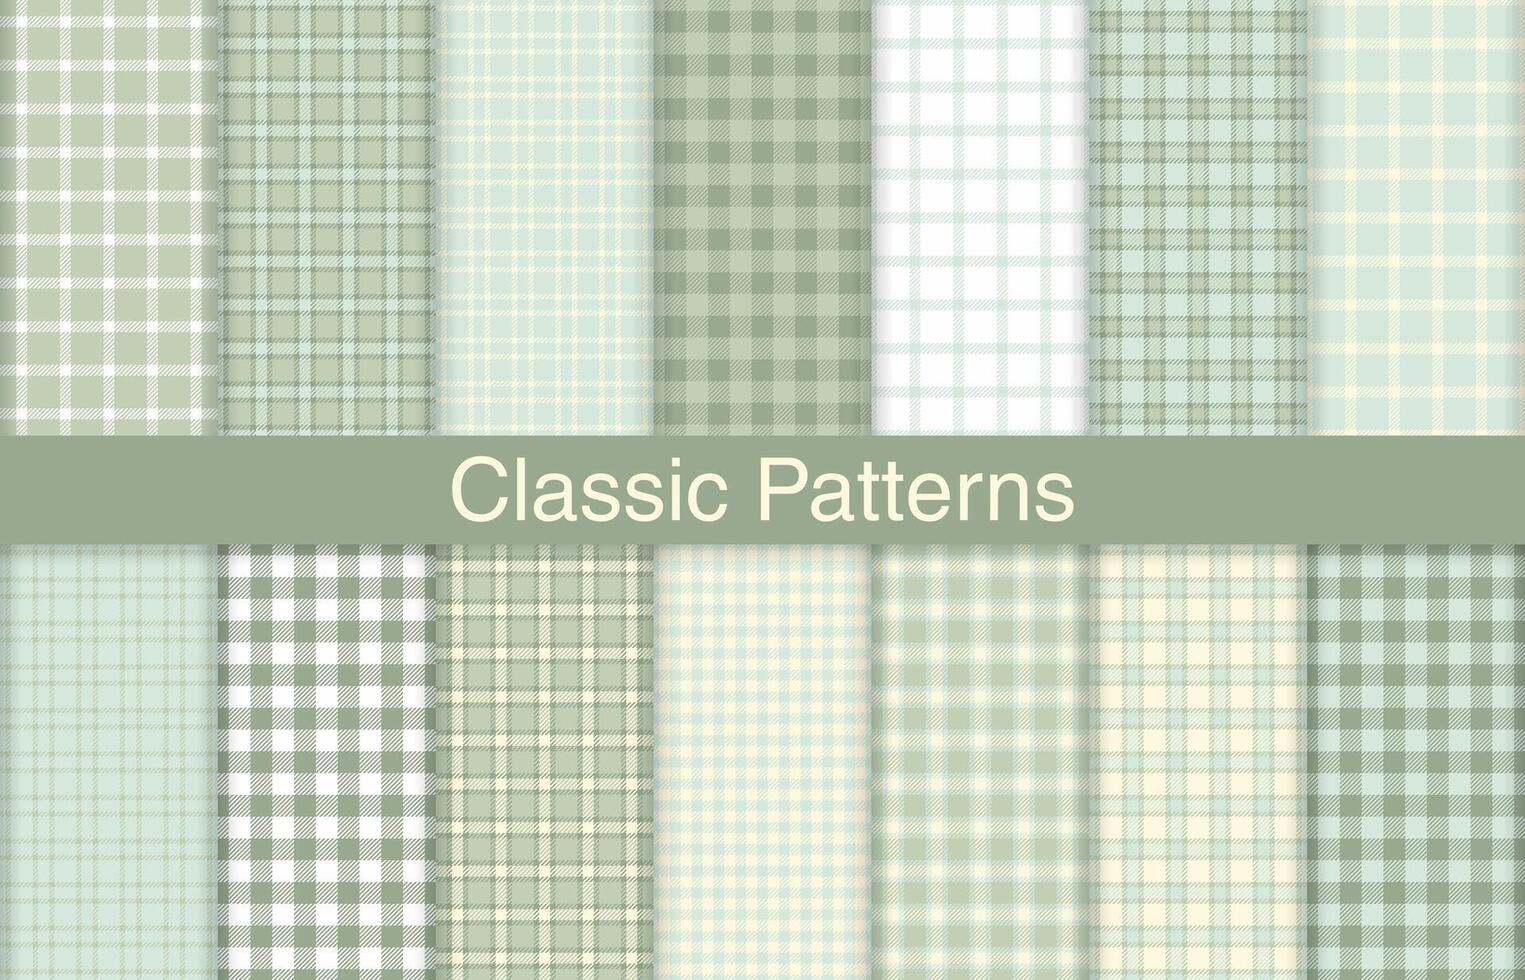 Classic plaid bundles, textile design, checkered fabric pattern for shirt, dress, suit, wrapping paper print, invitation and gift card. vector